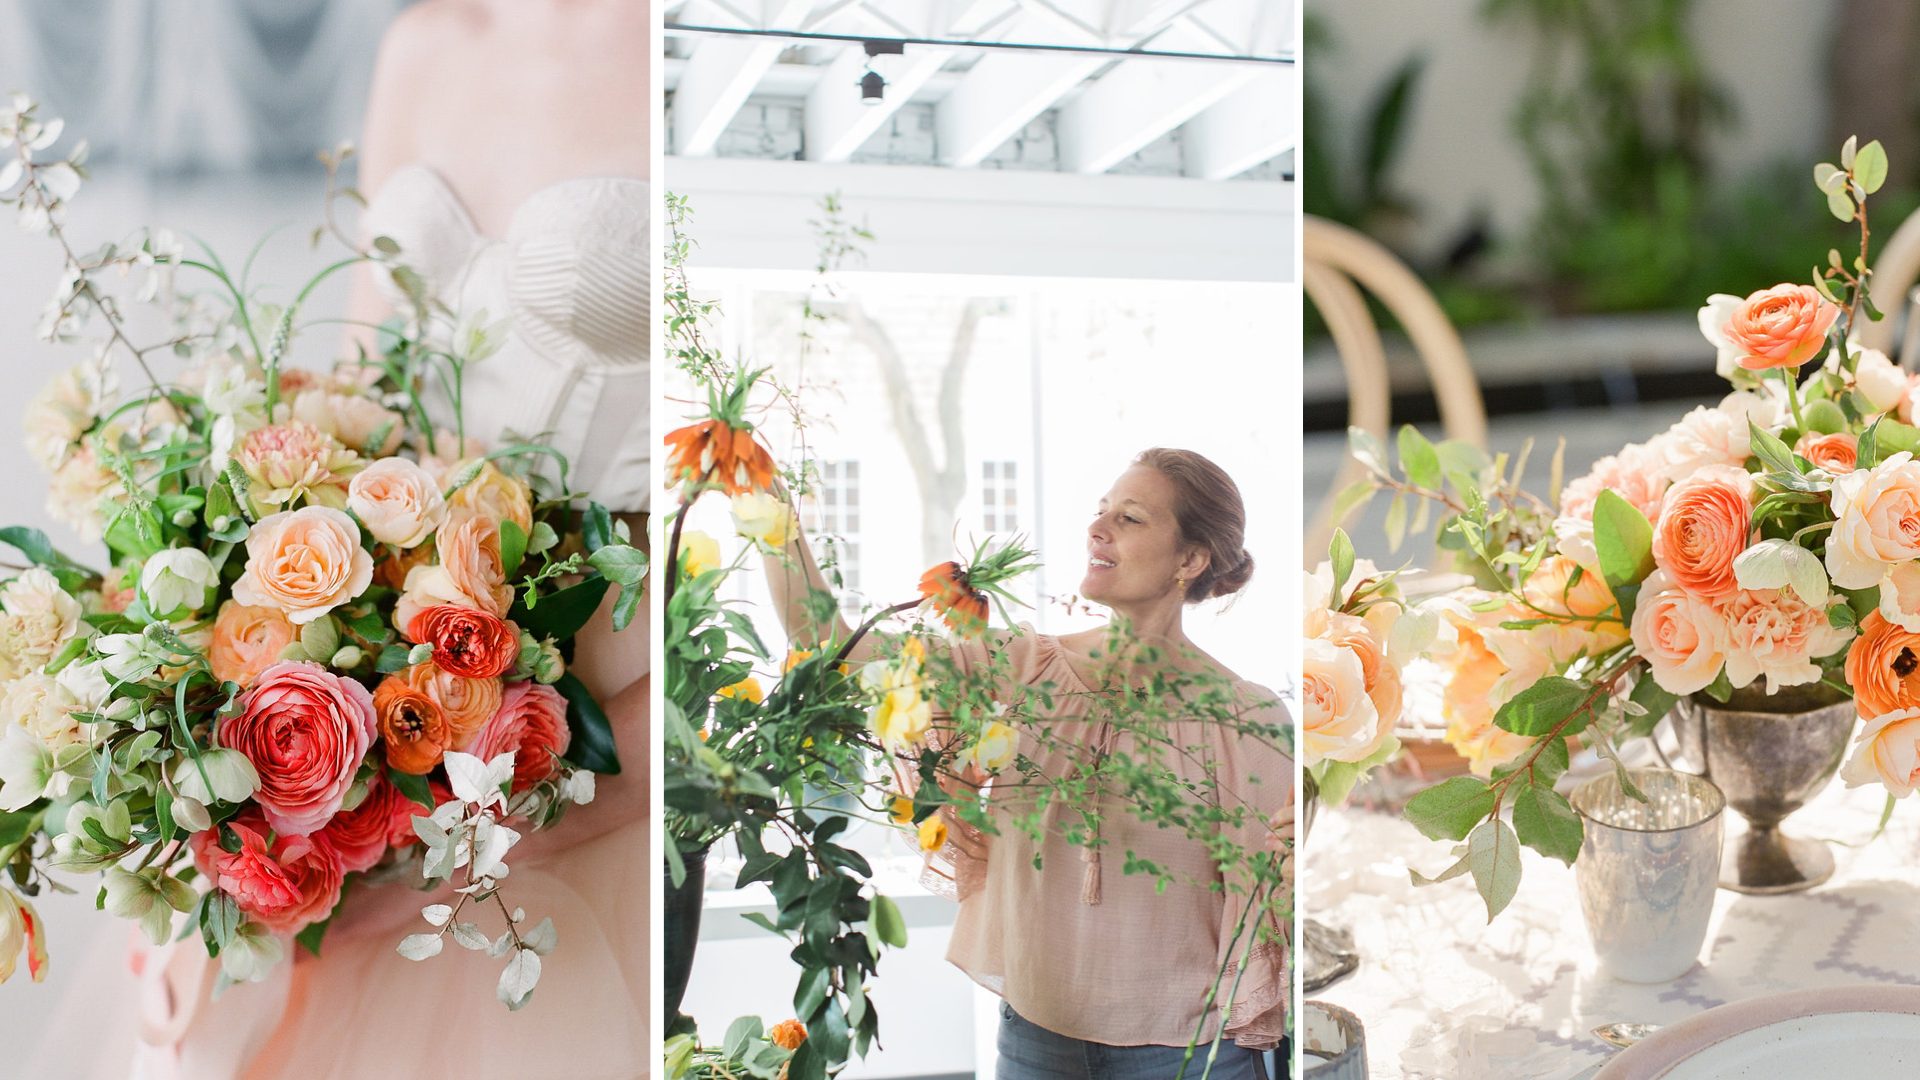 Meet the flower arranging masters of the world